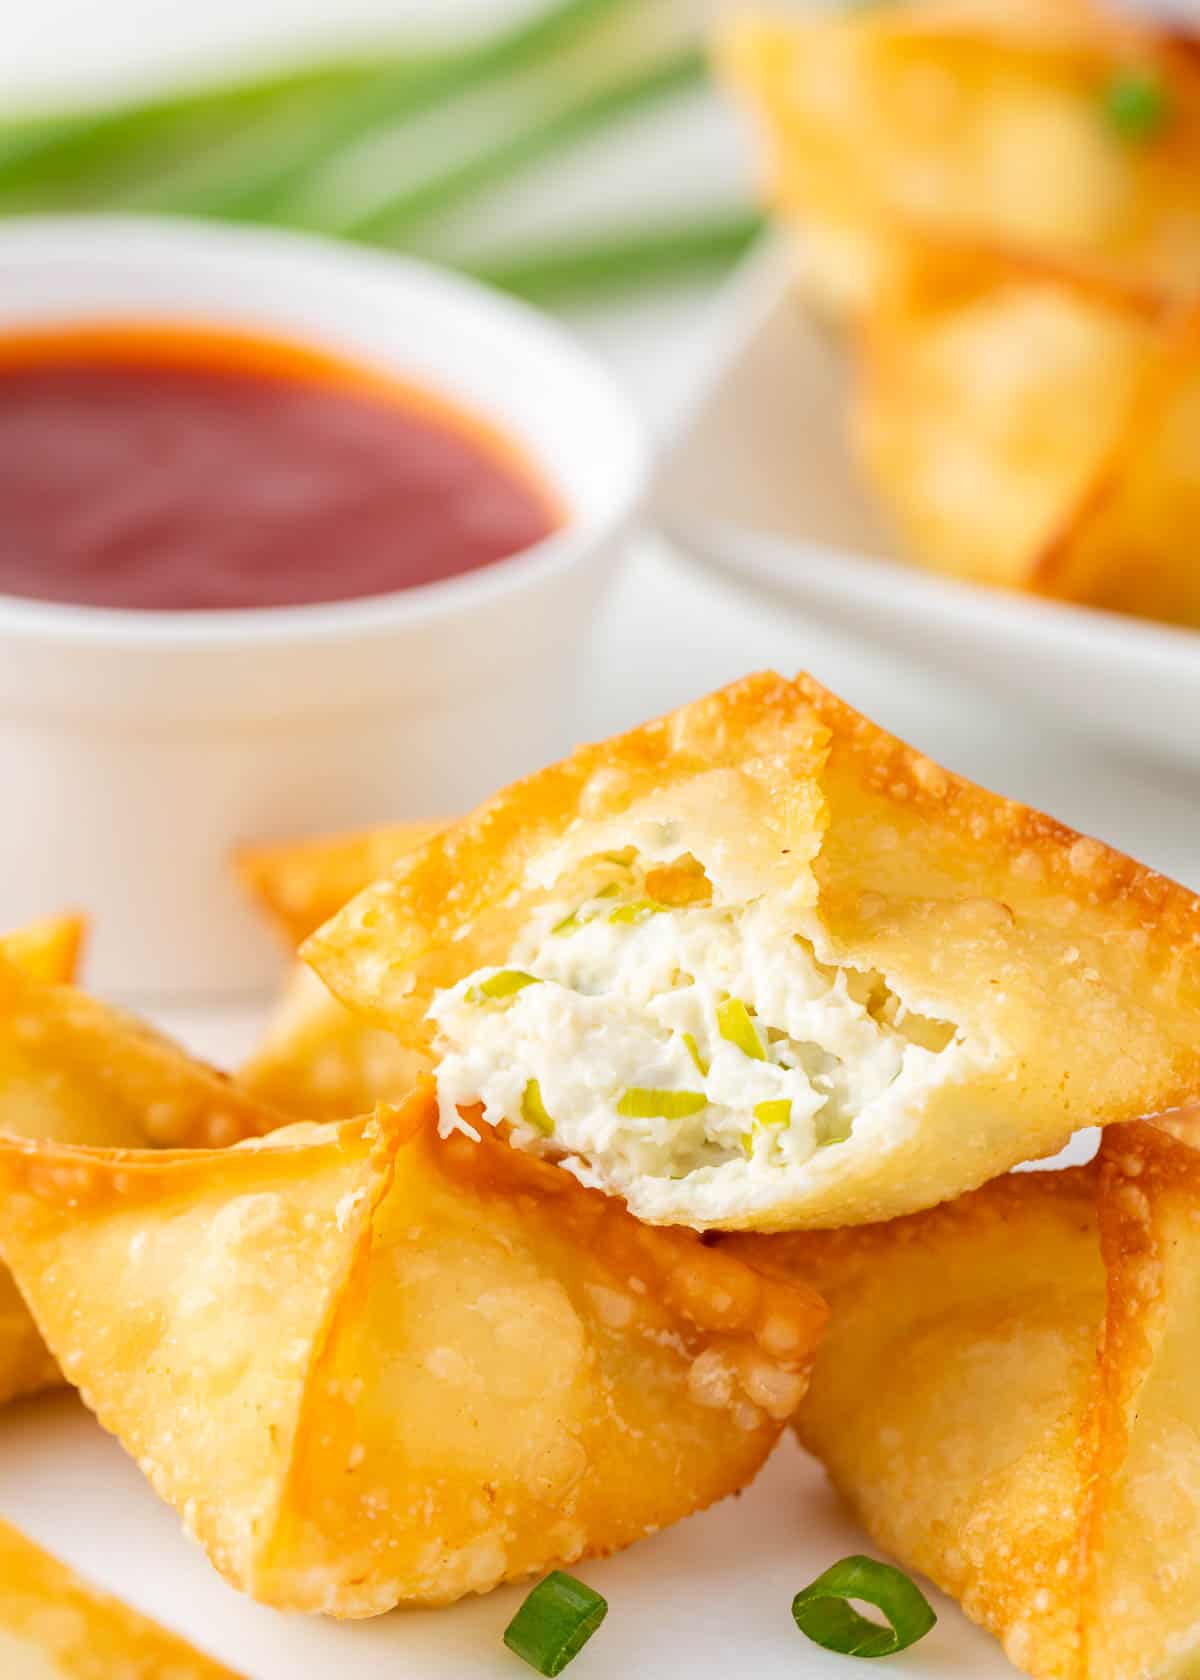 Crab rangoon with a bite taken on a plate with sauce.